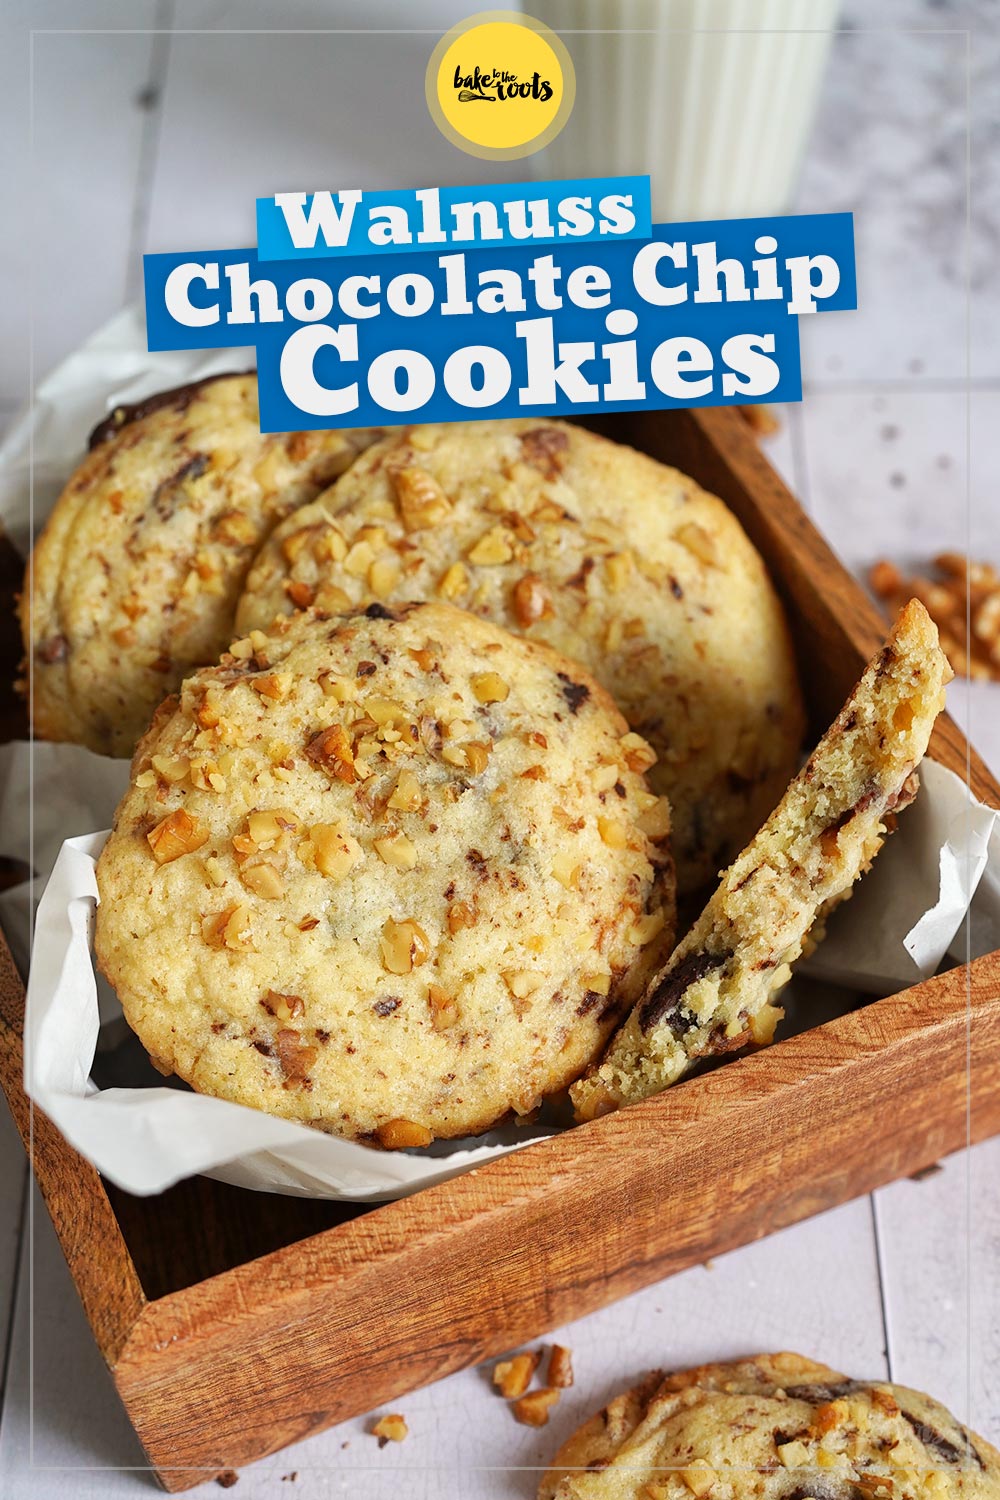 Walnuss Chocolate Chip Cookies | Bake to the roots